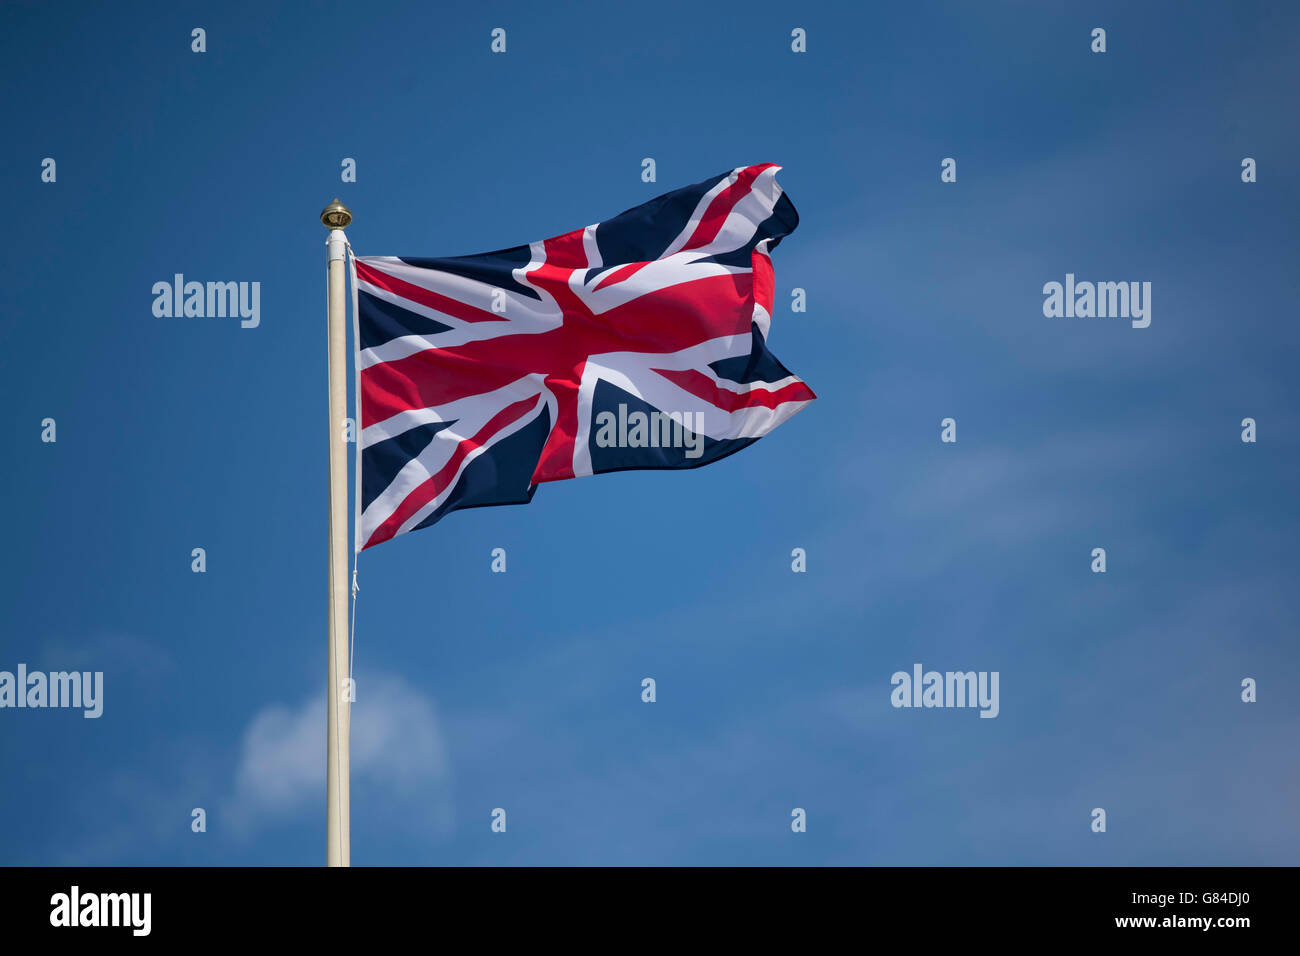 Union Jack flag of the United Kingdom blowing in the wind against a blue sky. Stock Photo